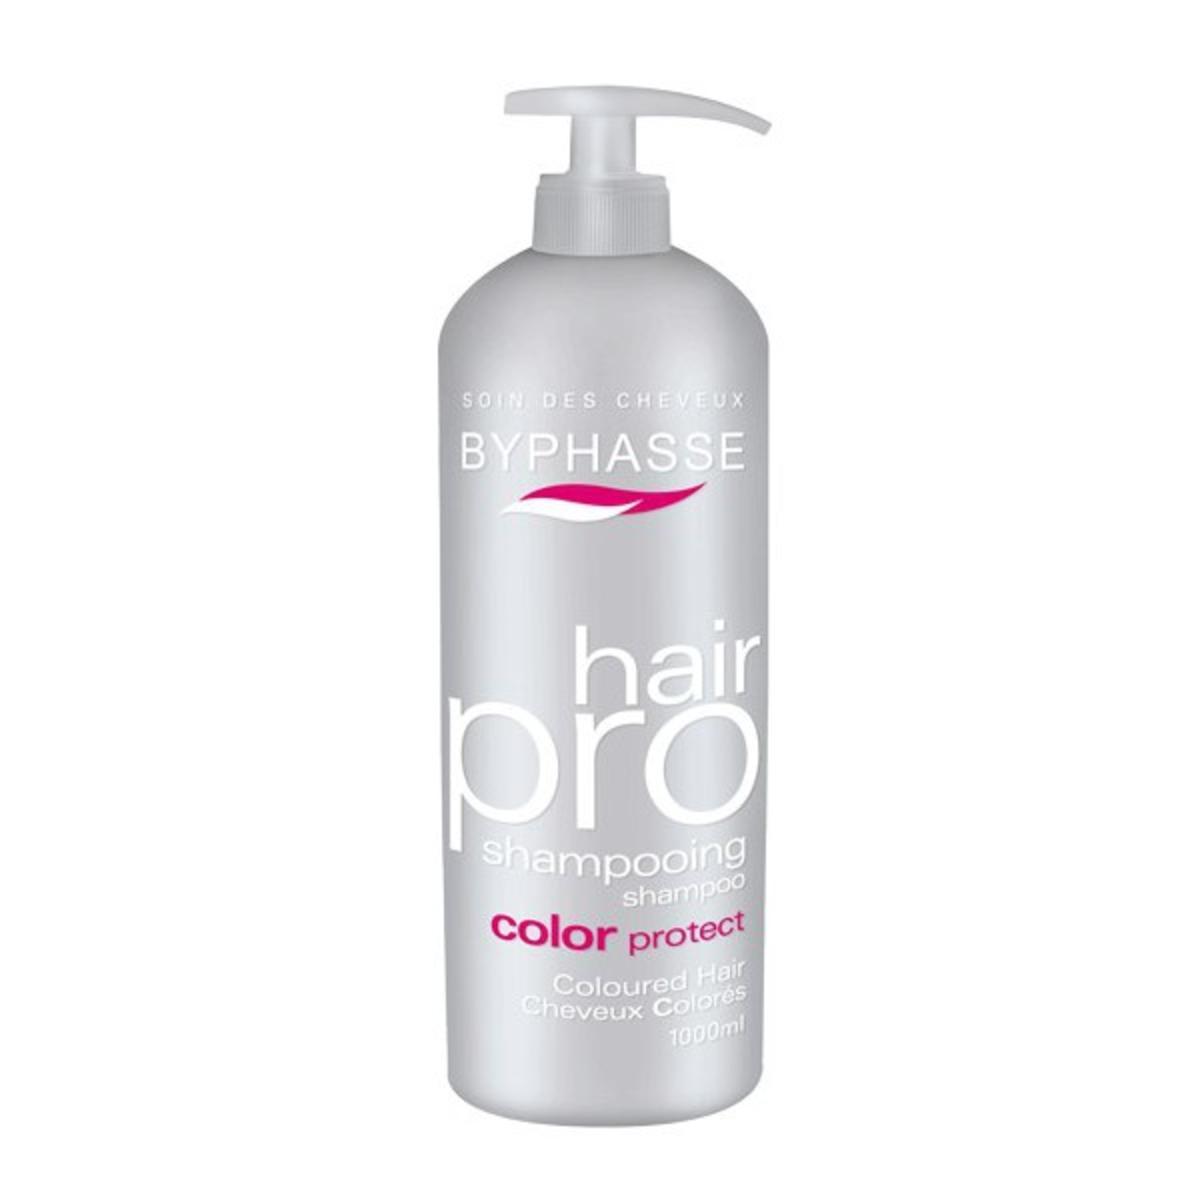 Shampooing hair pro color protect